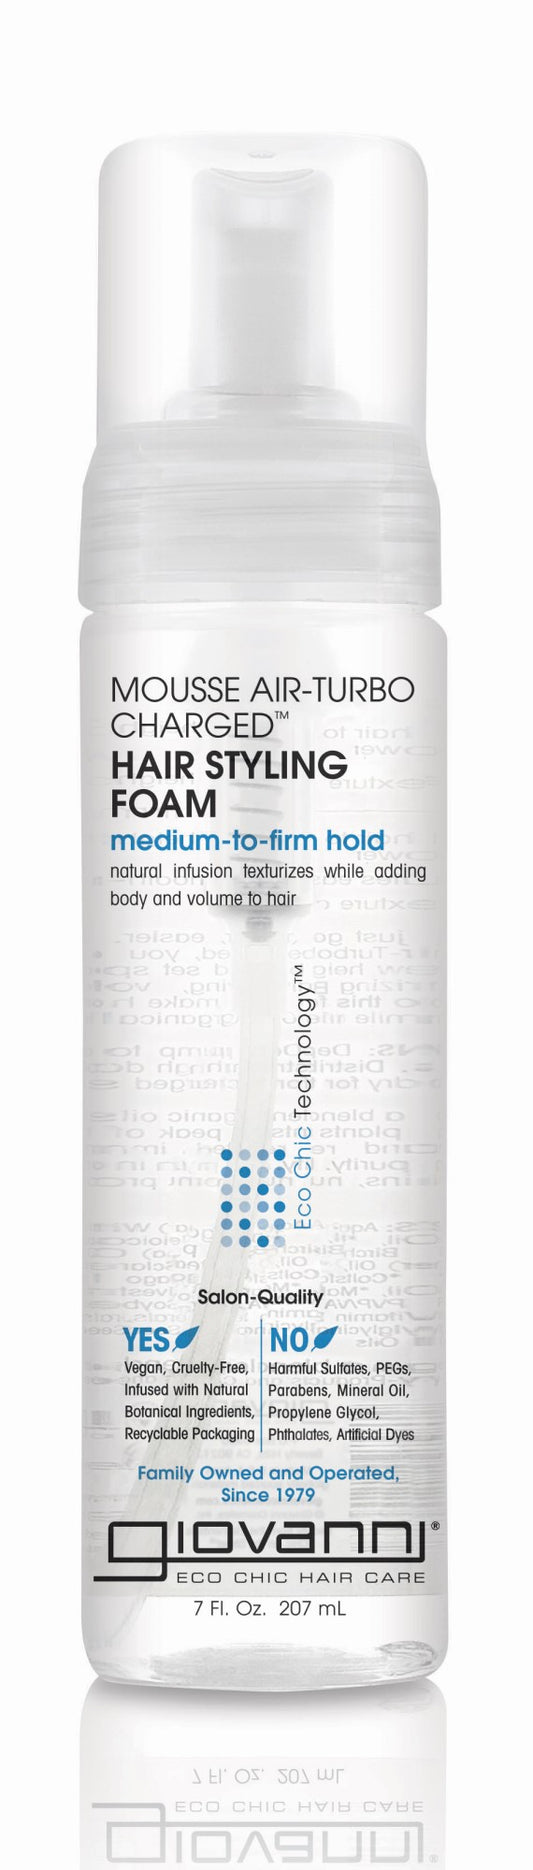 MOUSSE AIR-TURBO CHARGED™ HAIR STYLING FOAM